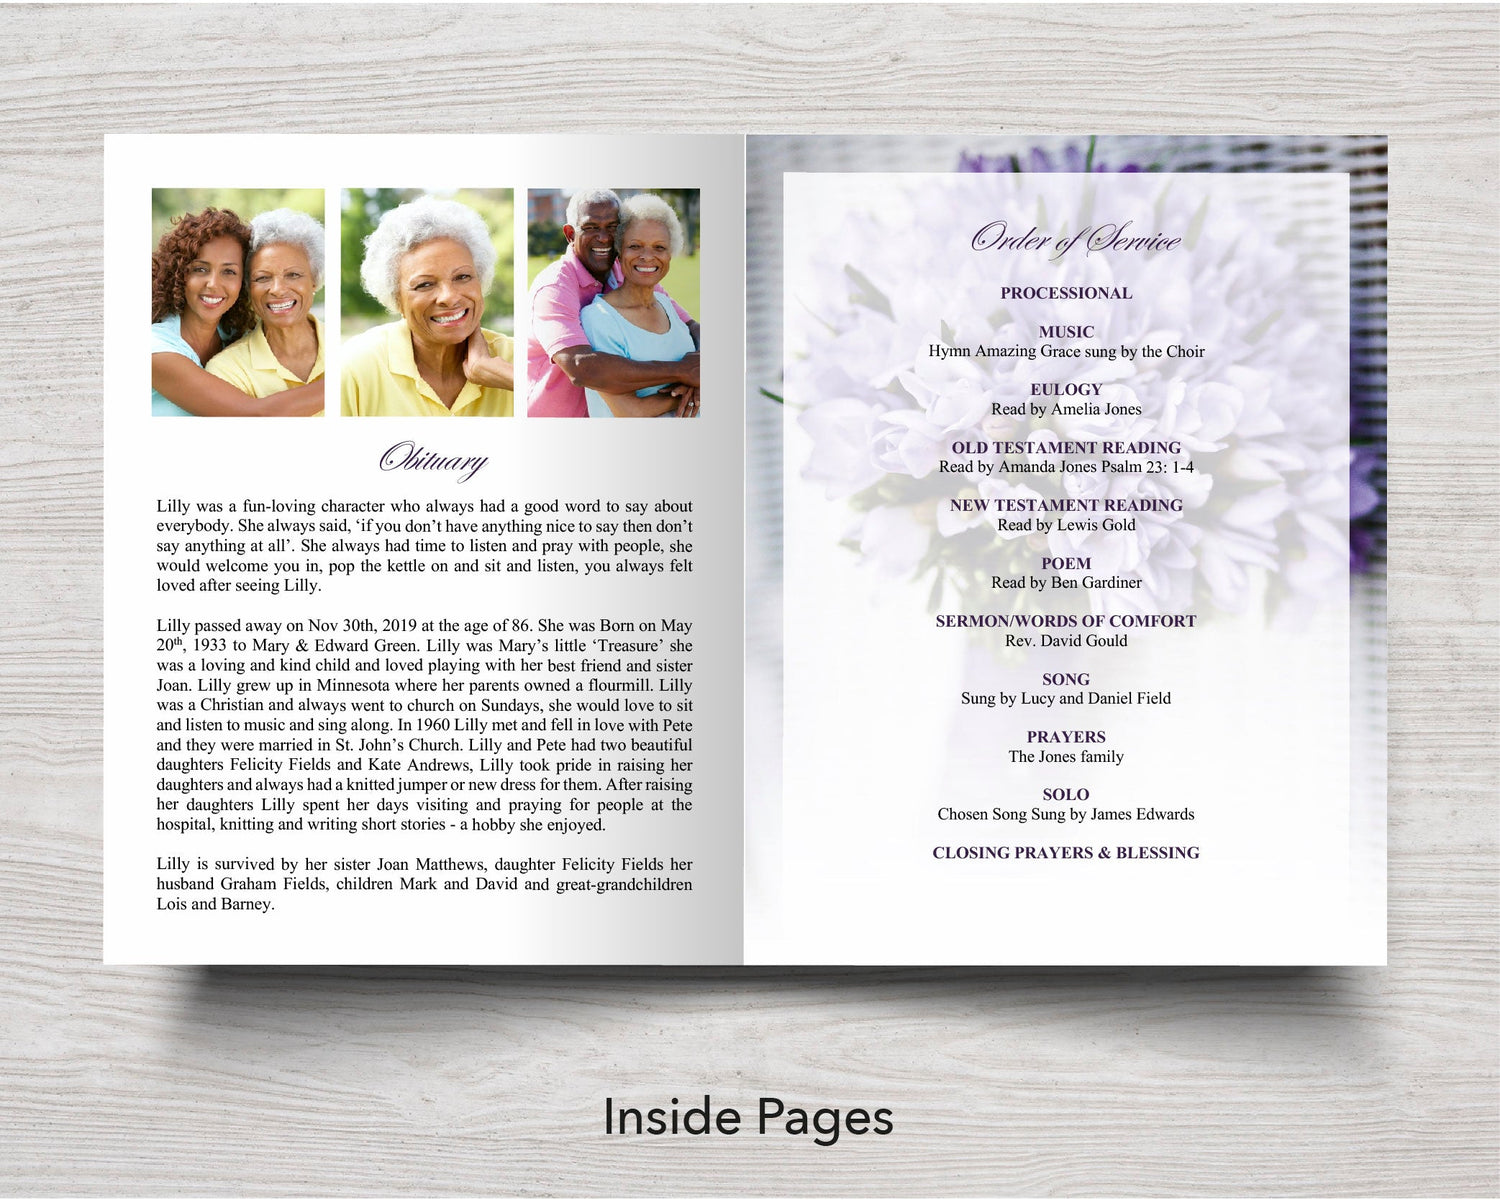 8 Page Purple Bouquet Funeral Program Template (11 x 17 inches)